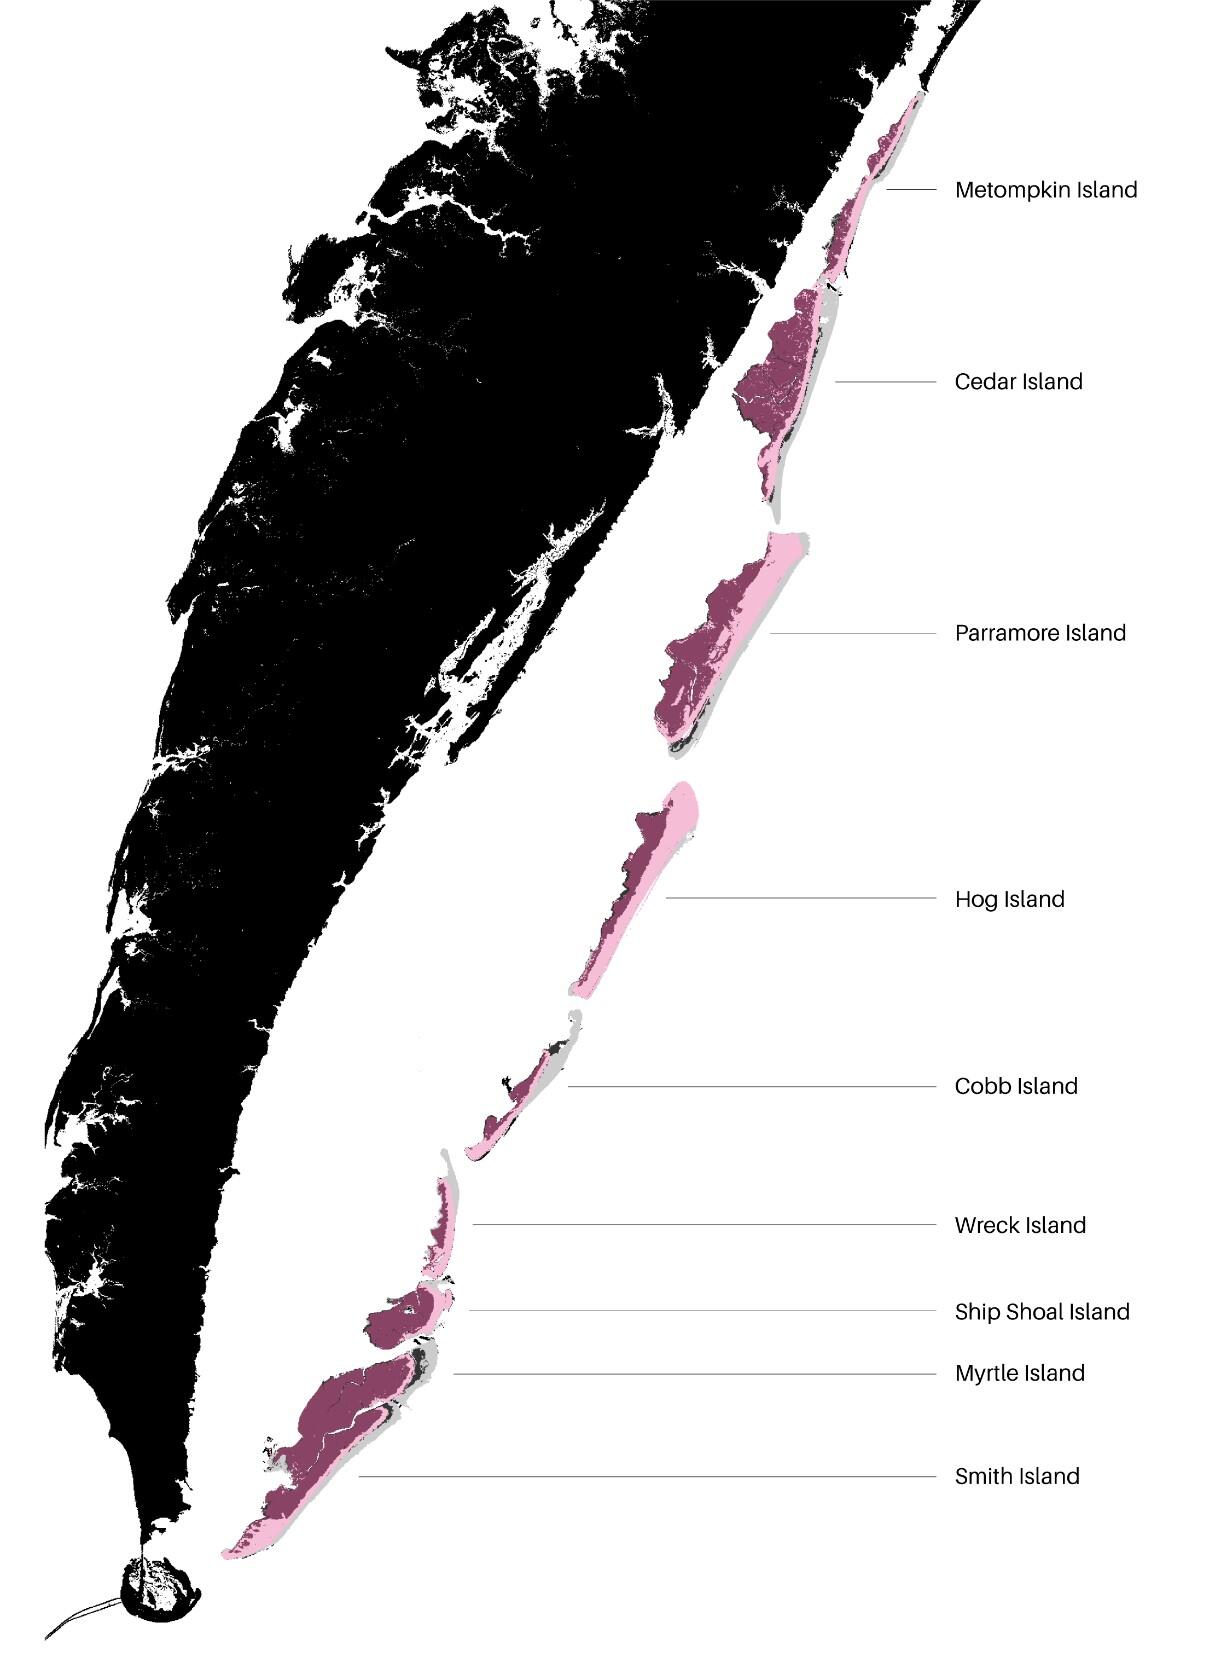 Overall change along the Virginia barrier islands during the 1984 to 2016 time period. Light grey is 1984 upland; Dark gray is 1984 marsh; Light purple is 2016 upland; Dark purple is 2016 marsh. Along several islands, evidence of upland migration onto the marsh is visible.